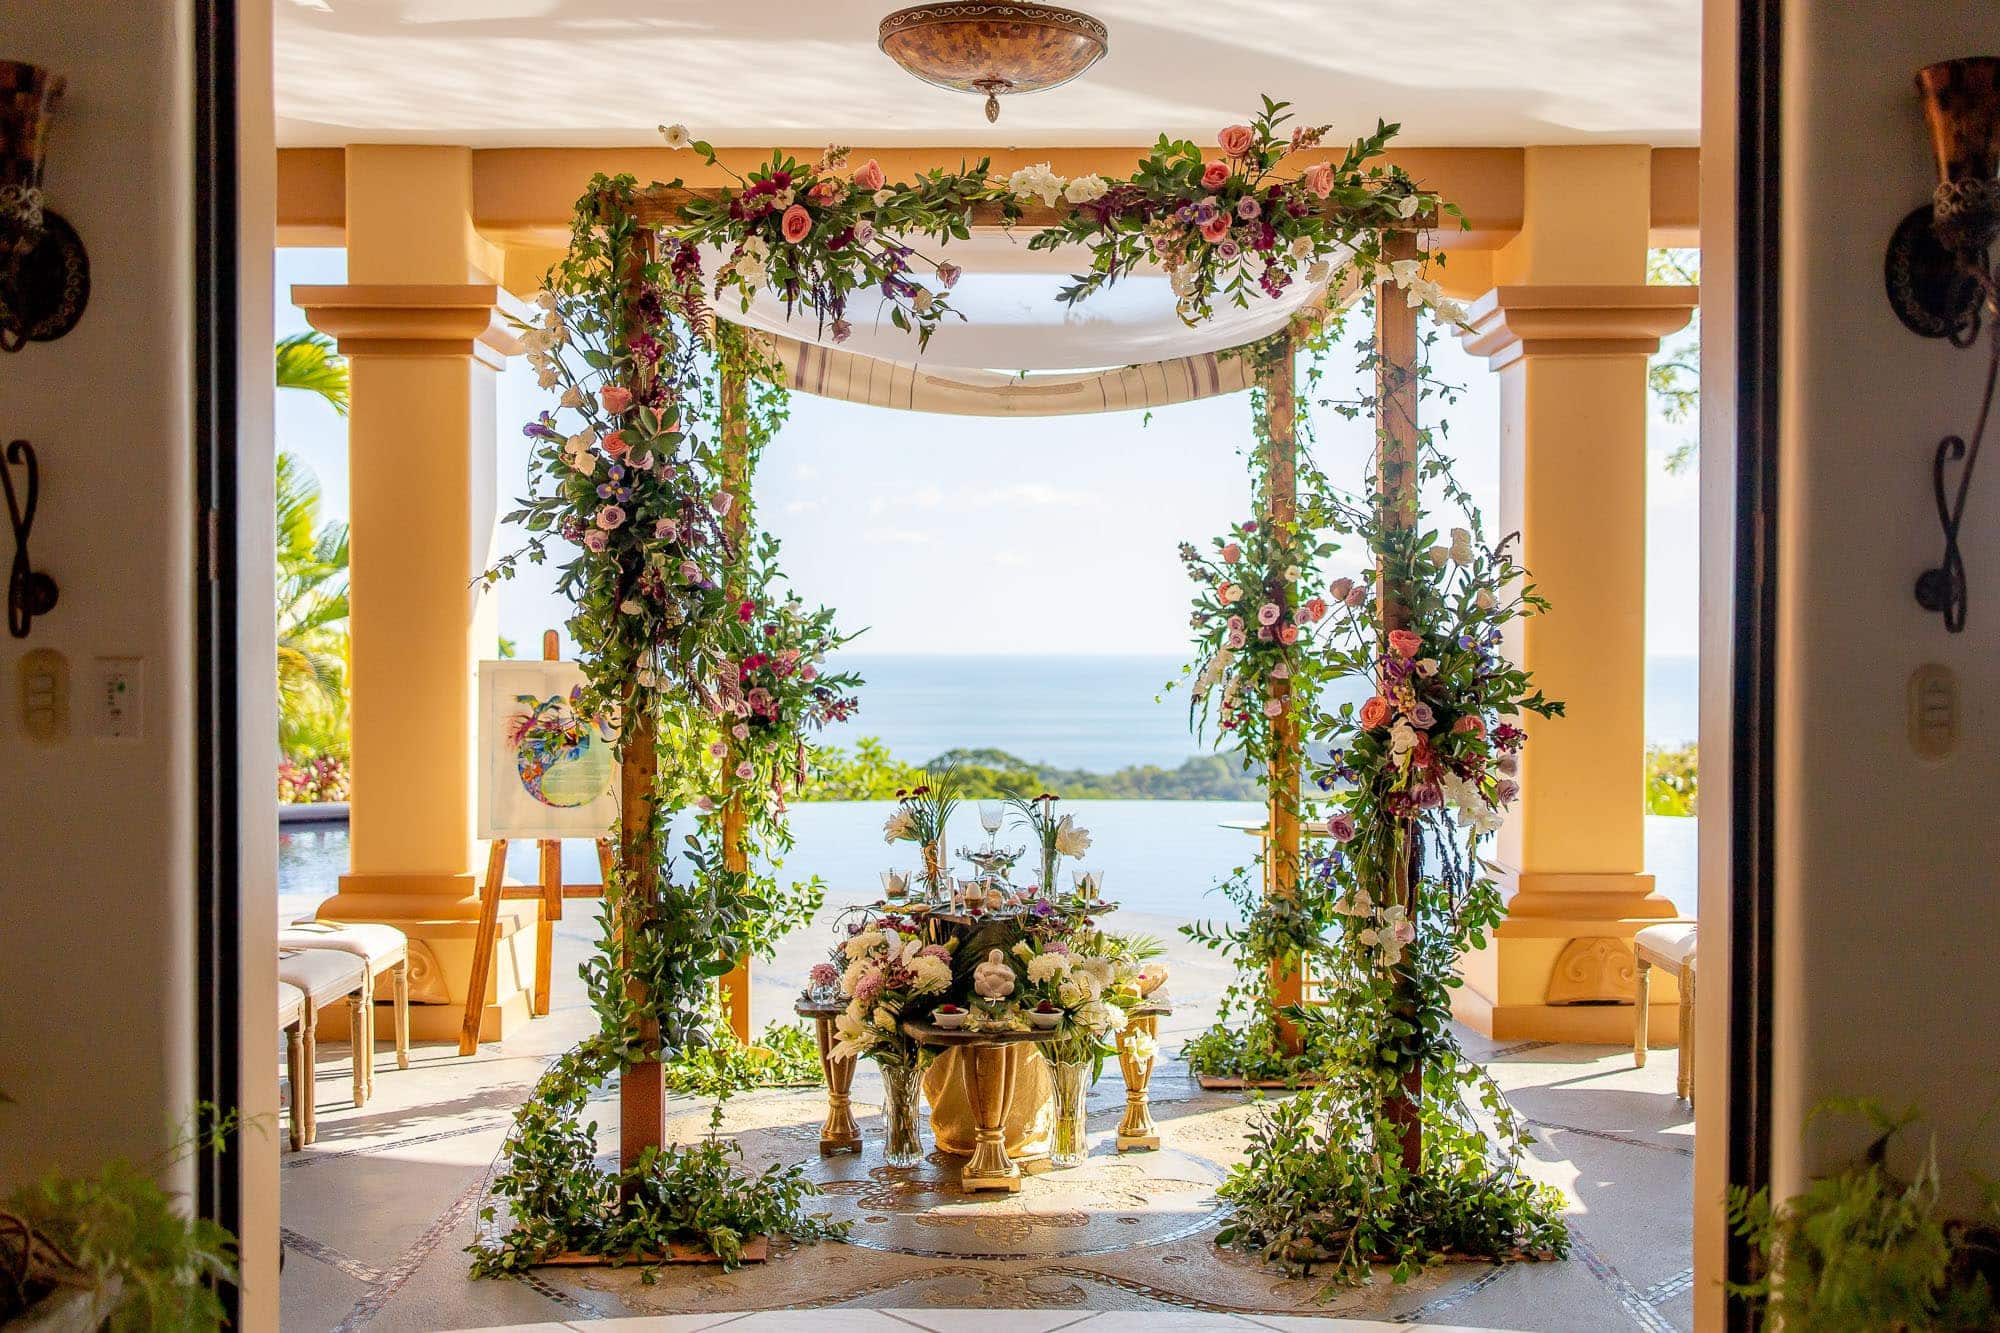 The gorgeous floral display for the ceremony